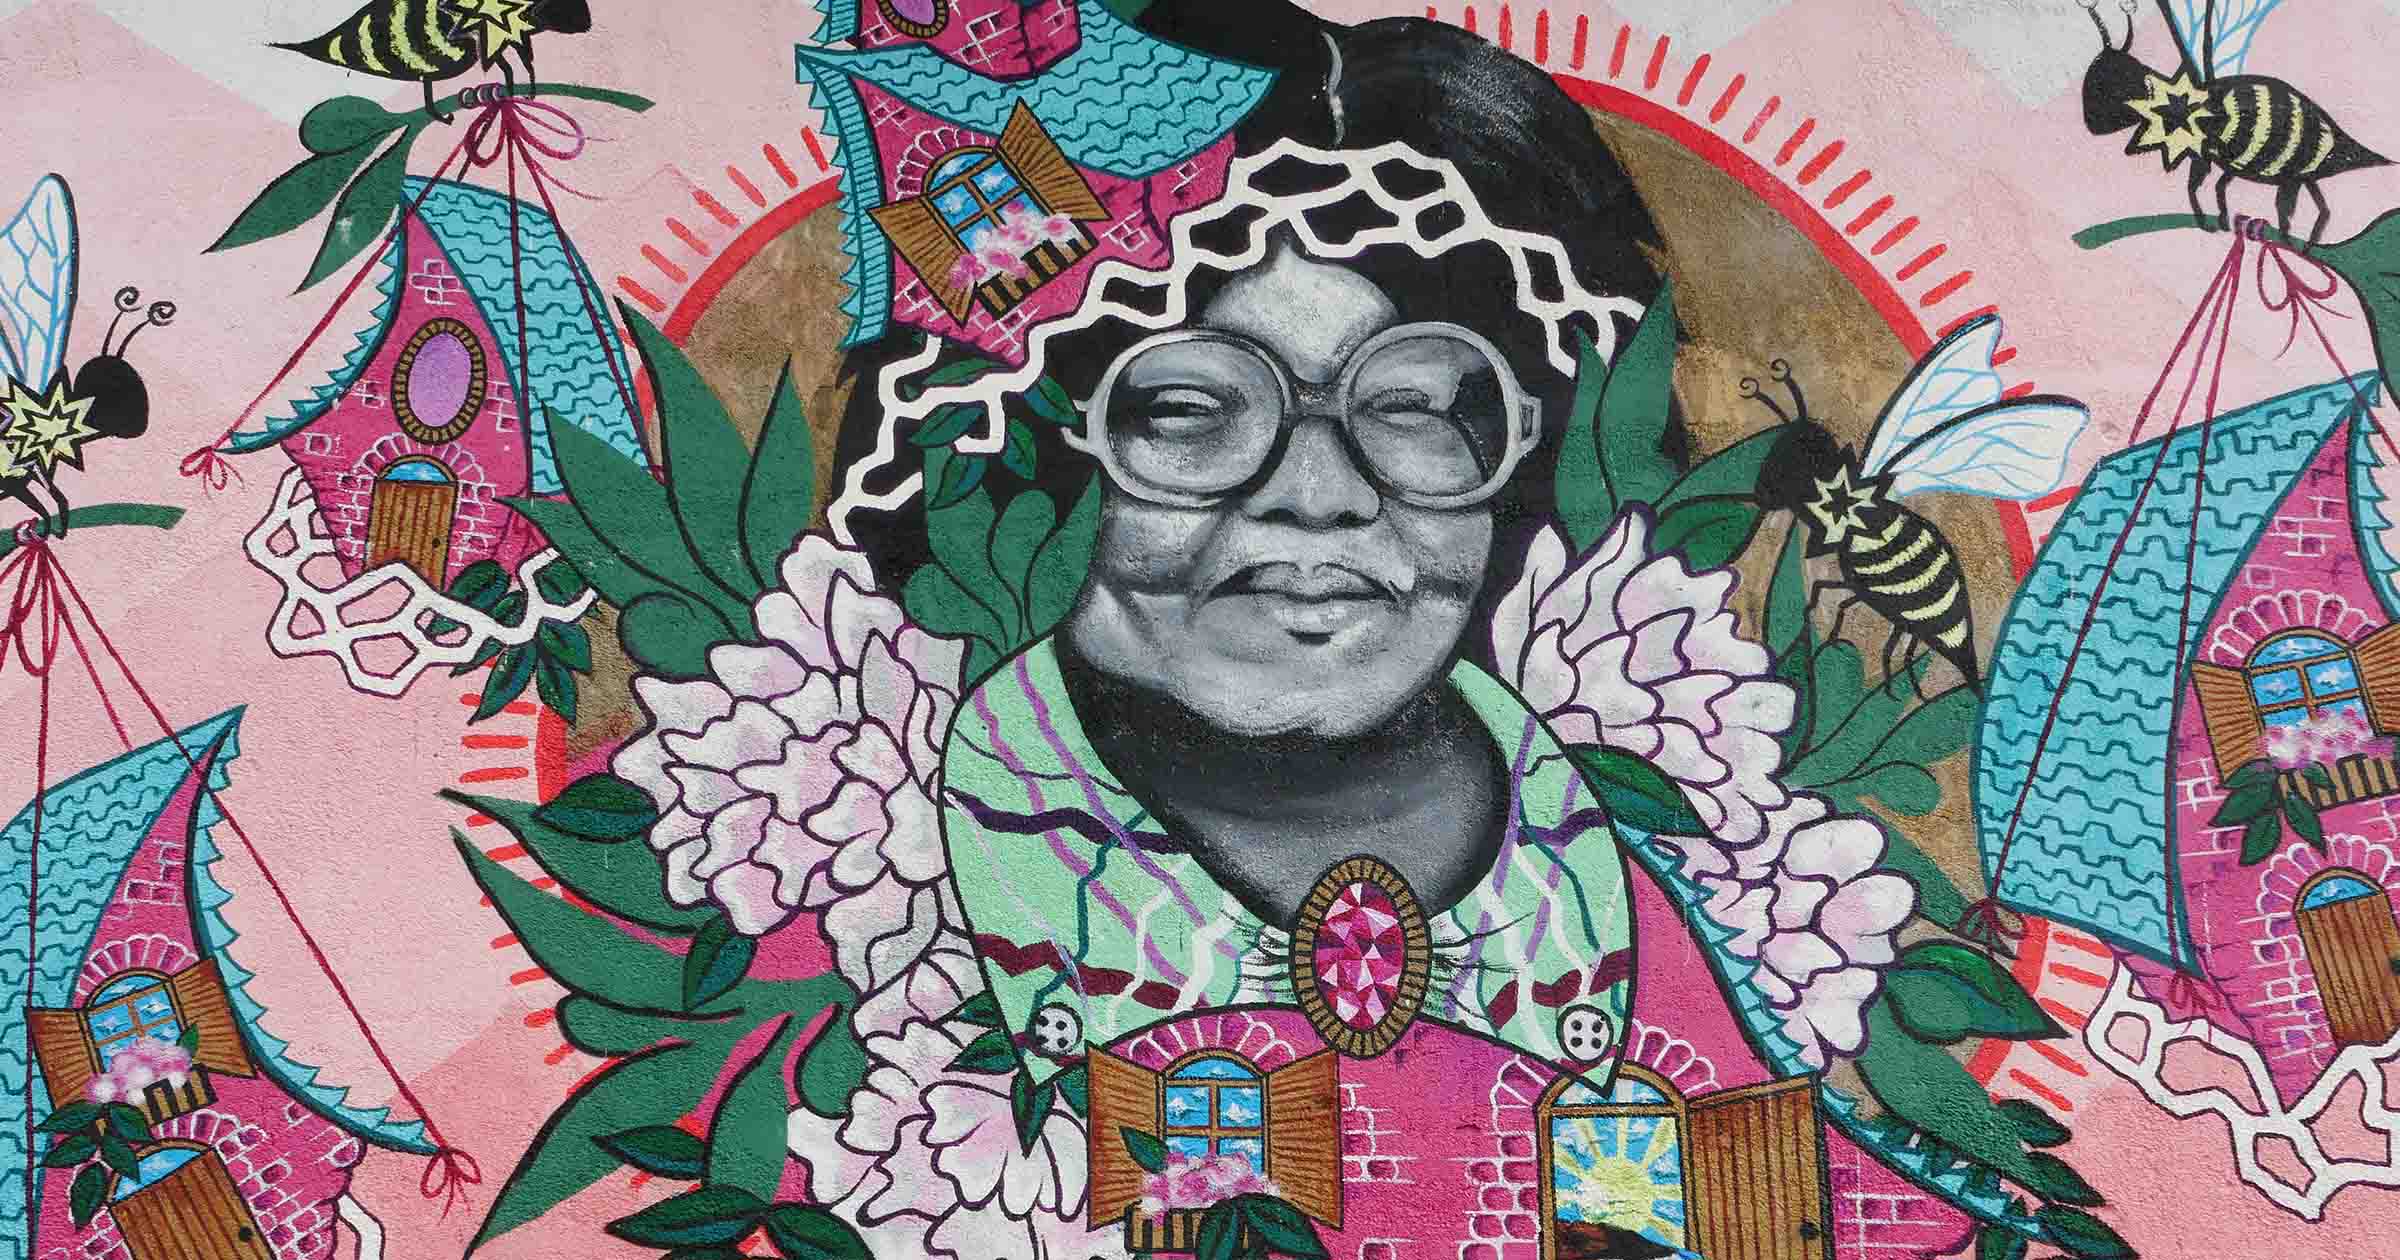 Part of the Heritage Arts Mural Project, “We Rise by Lifting Others” showcases Niagara Falls’ Hero of Public Housing, Doris Jones